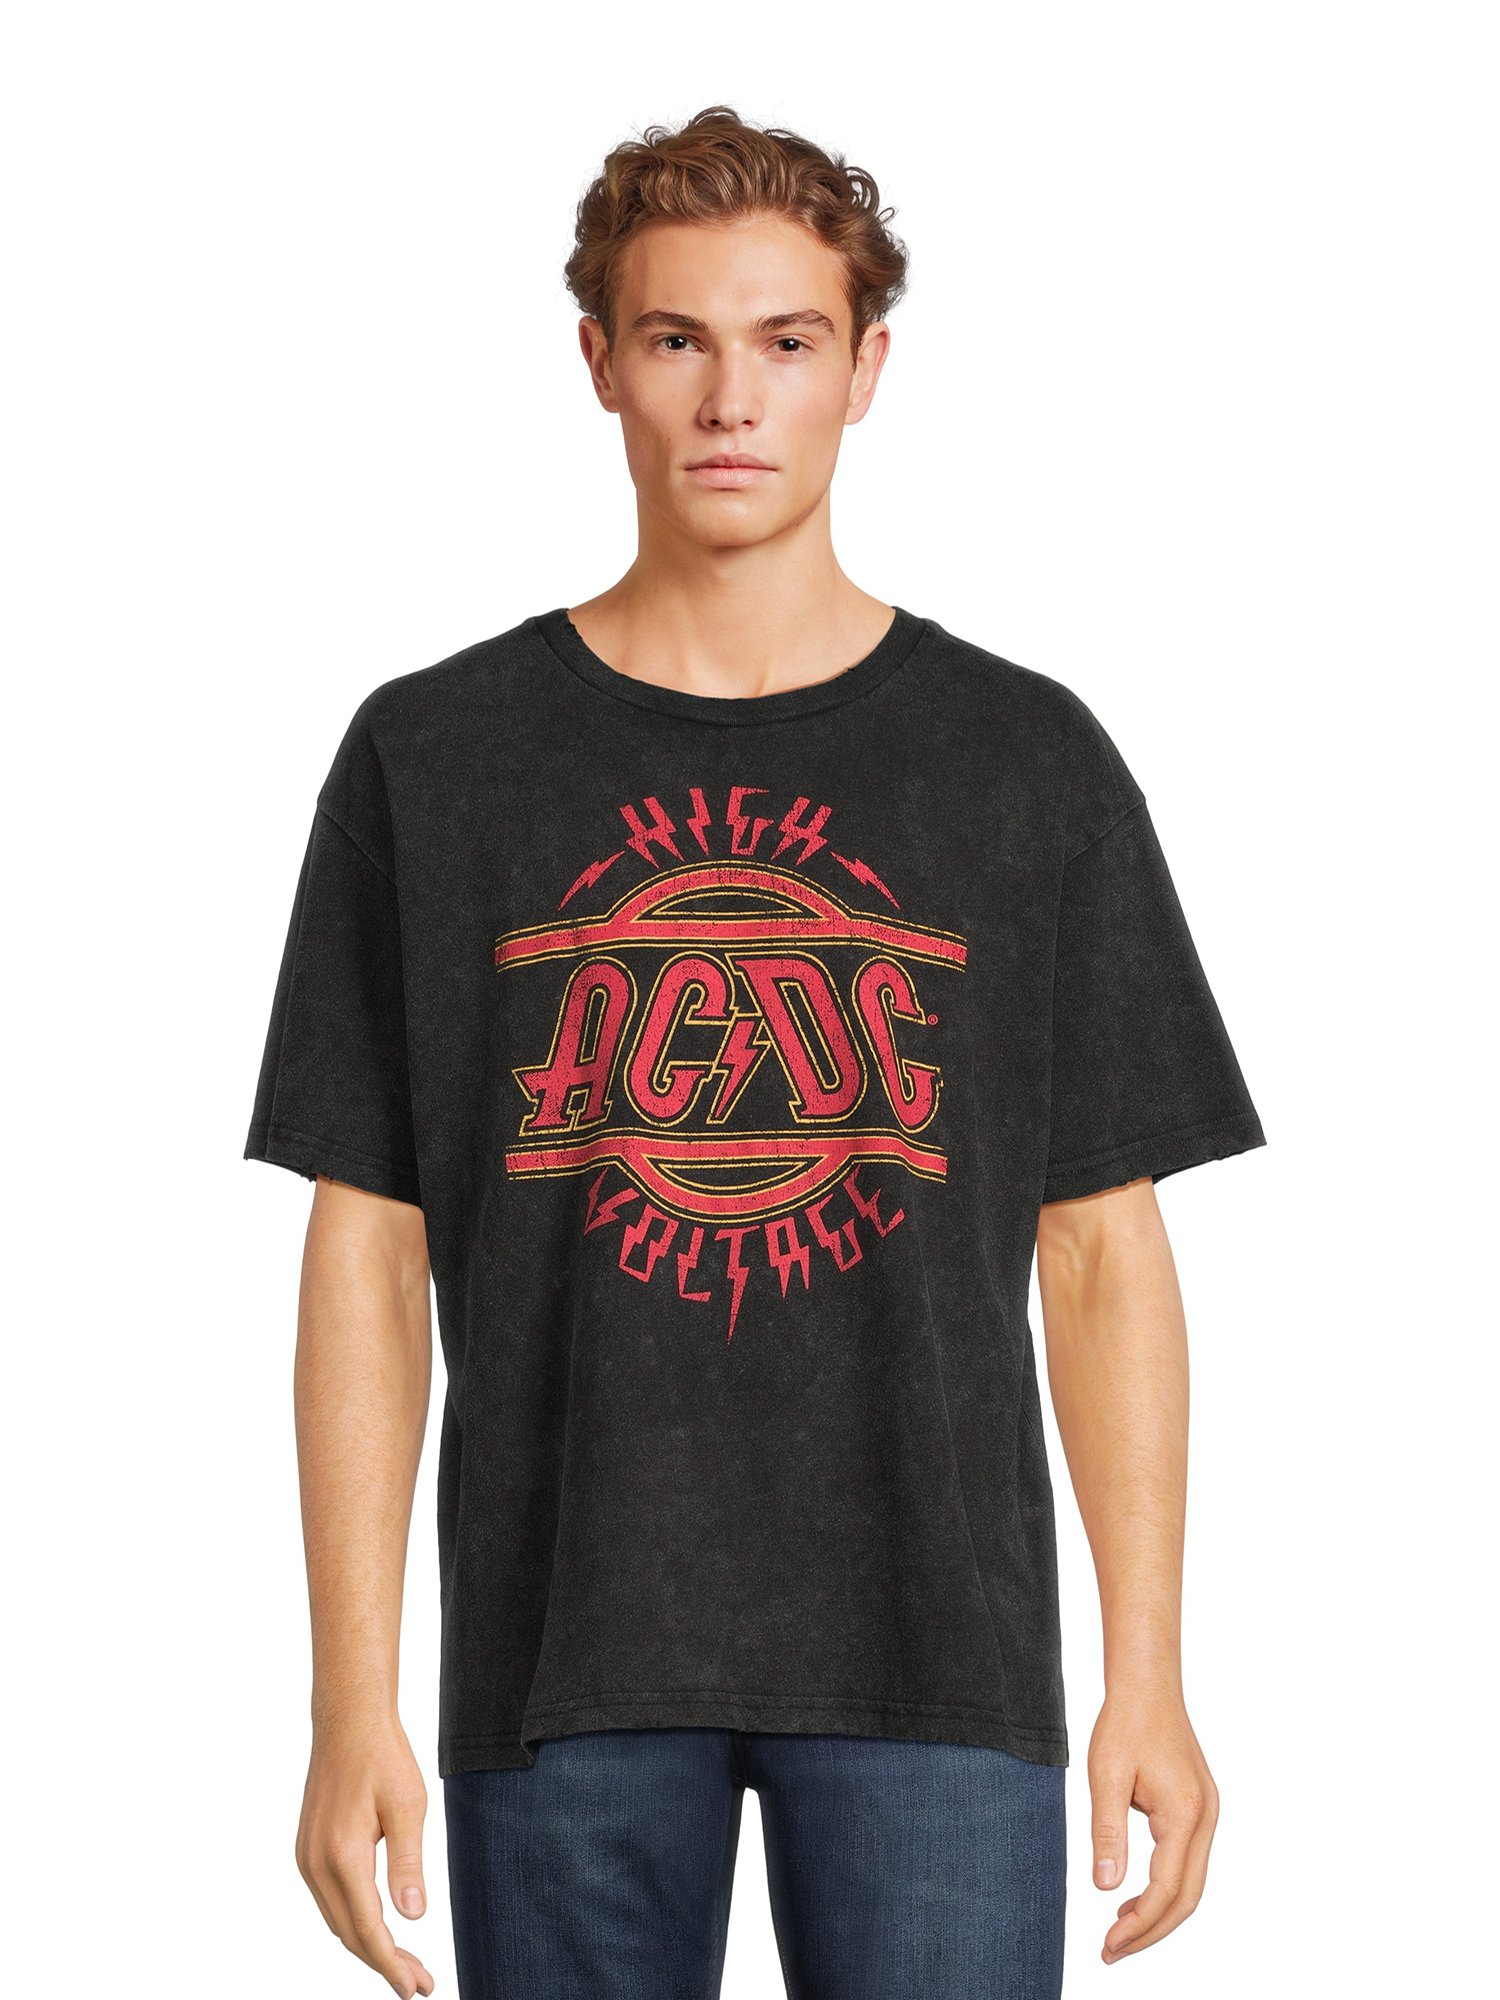 Acdc Mens and Big Mens Oversized Graphic Band Tee, Sizes Xs-3xl